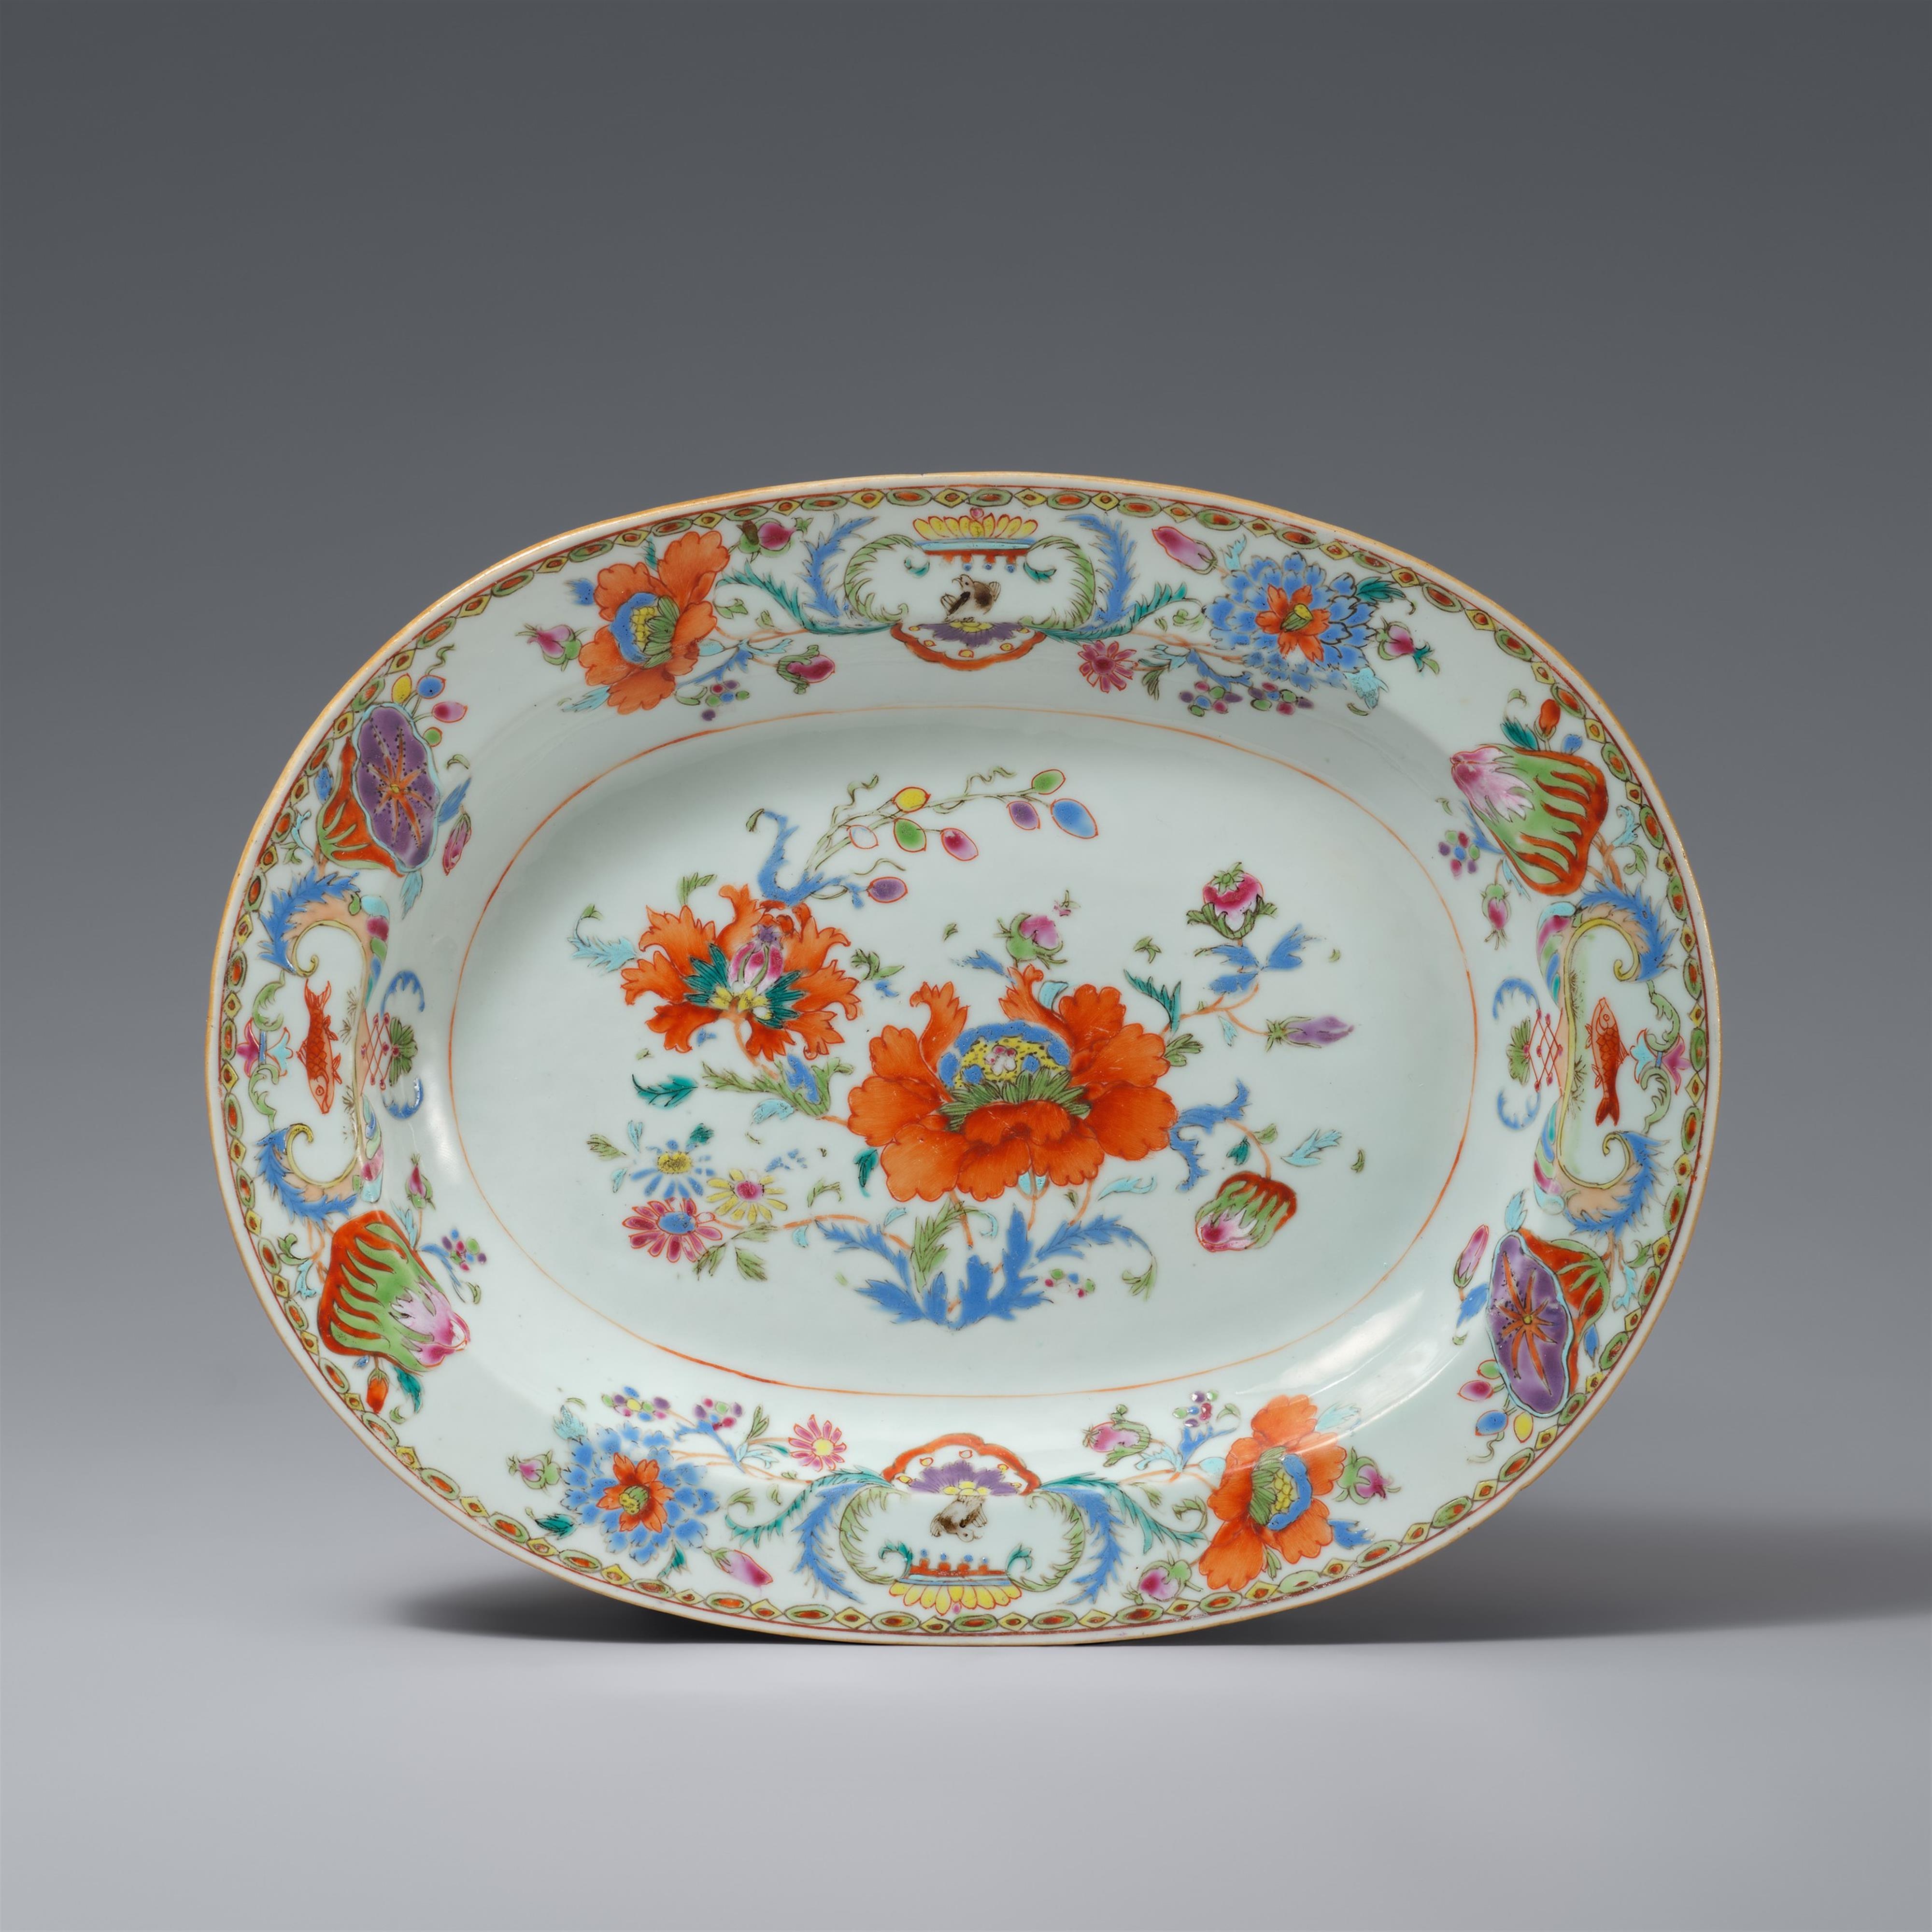 An oval platter from the 'Pompadour' service. Qianlong period, around 1745 - image-1